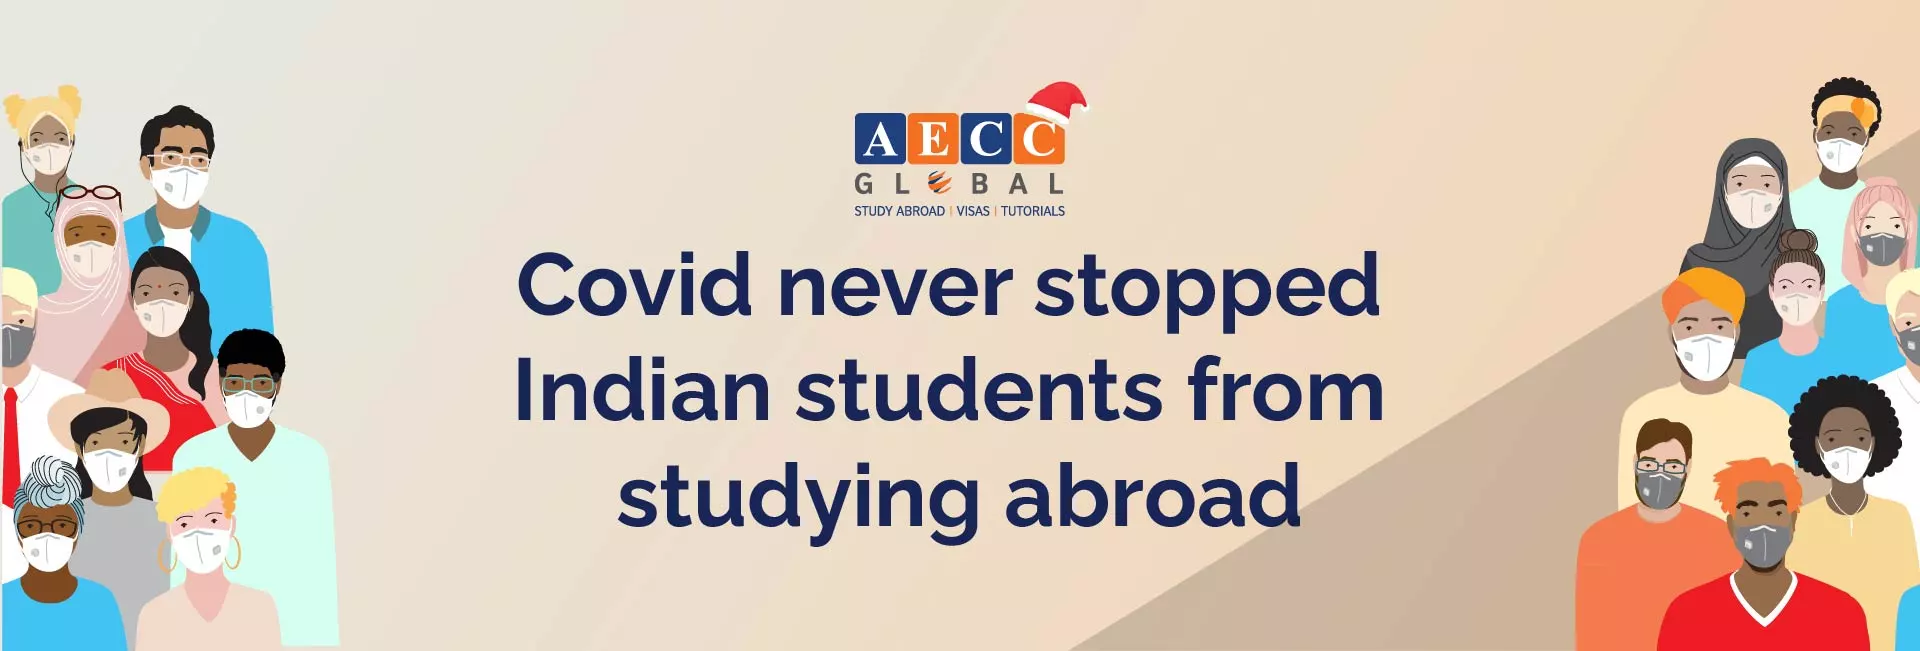 Covid Never Stopped Indian Students from Studying Abroad